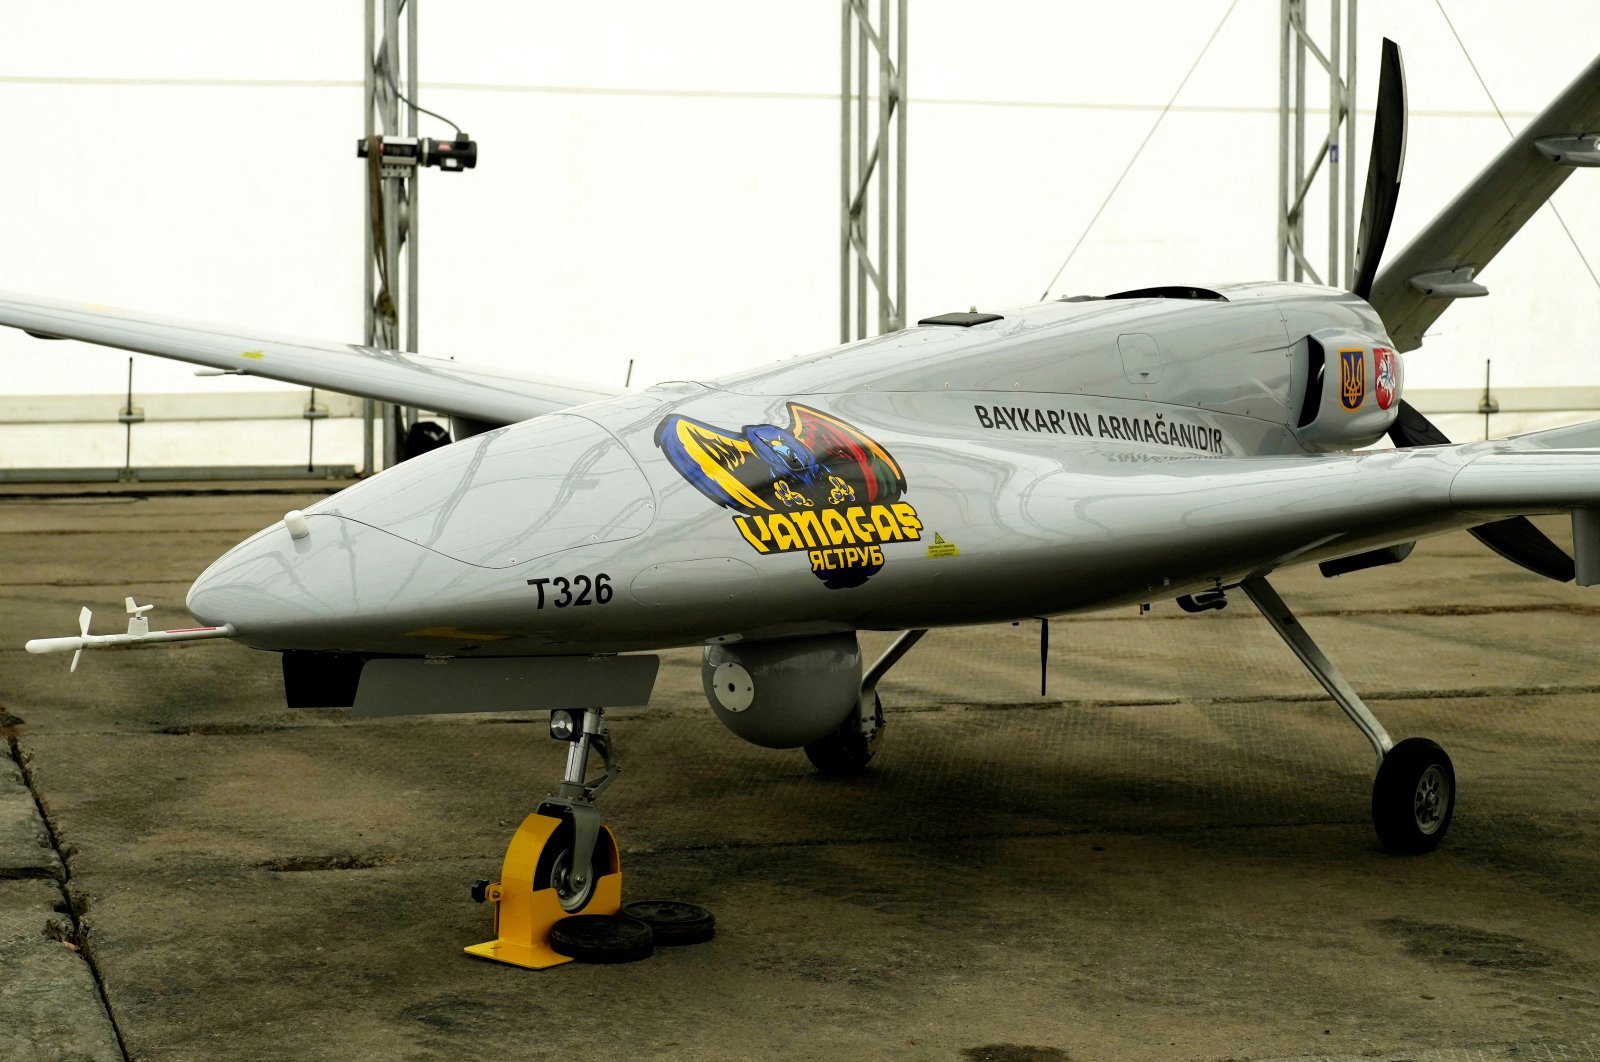 A Bayraktar TB2 combat drone donated to Ukraine is seen during a presentation, in Siauliai Air Base, Lithuania, July 6, 2022. (Reuters Photo)